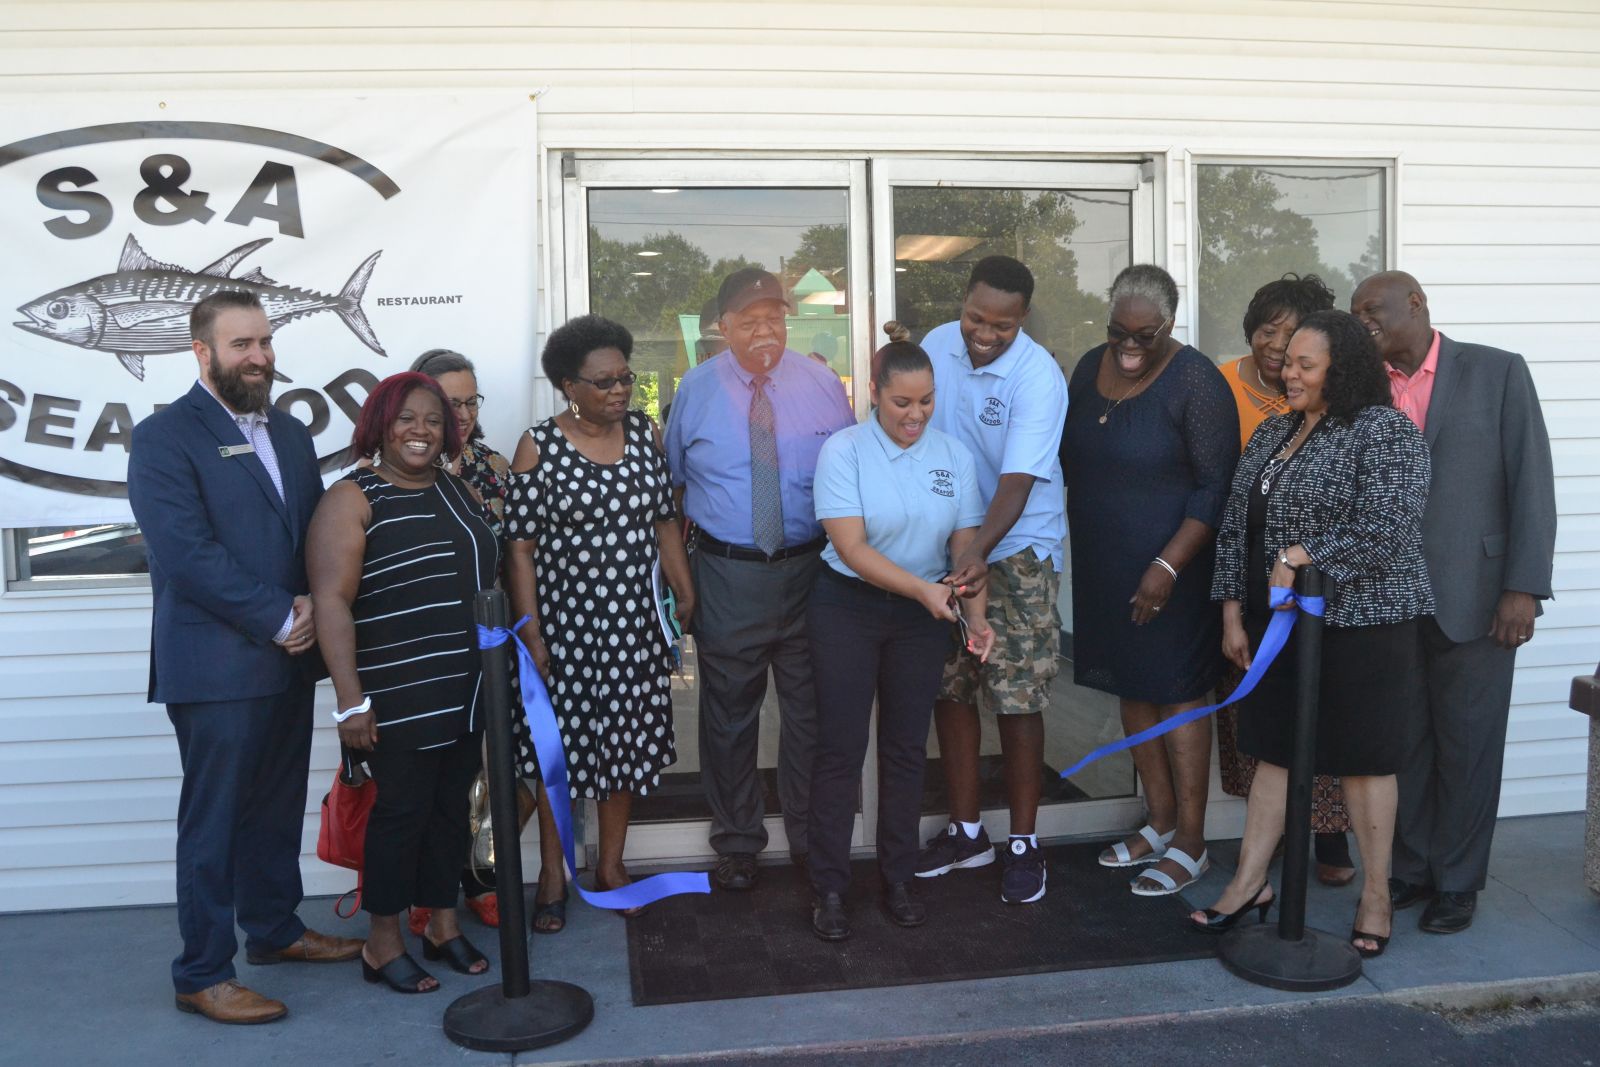 S&A Seafood celebrated the opening of a new location in North Columbia with a ribbon cutting on Friday. Co-owners Davant and Delilah Jenkins (center, with scissors) opened their first restaurant and market in Blythewood seven years ago. (Photo/Travis Boland)